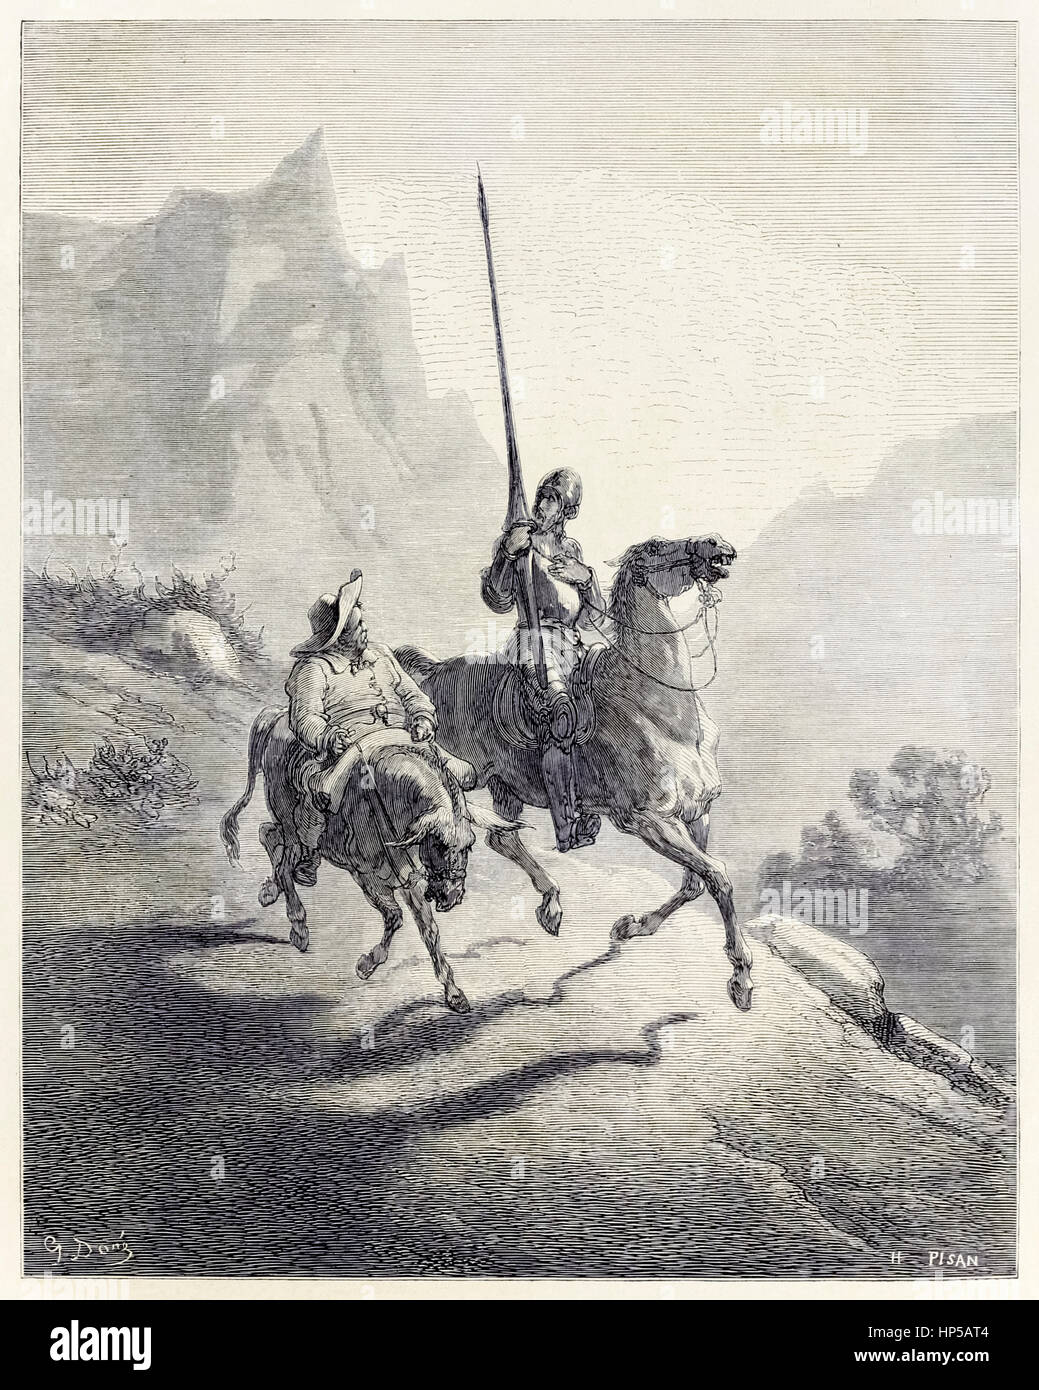 “Don Quixote and Sancho Setting Out” from ‘The History of Don Quixote’ by Miguel de Cervantes (1547-1616), illustration by Gustave Doré (1832-1883) engraving by Héliodore Pisan (1822-1890). Stock Photo